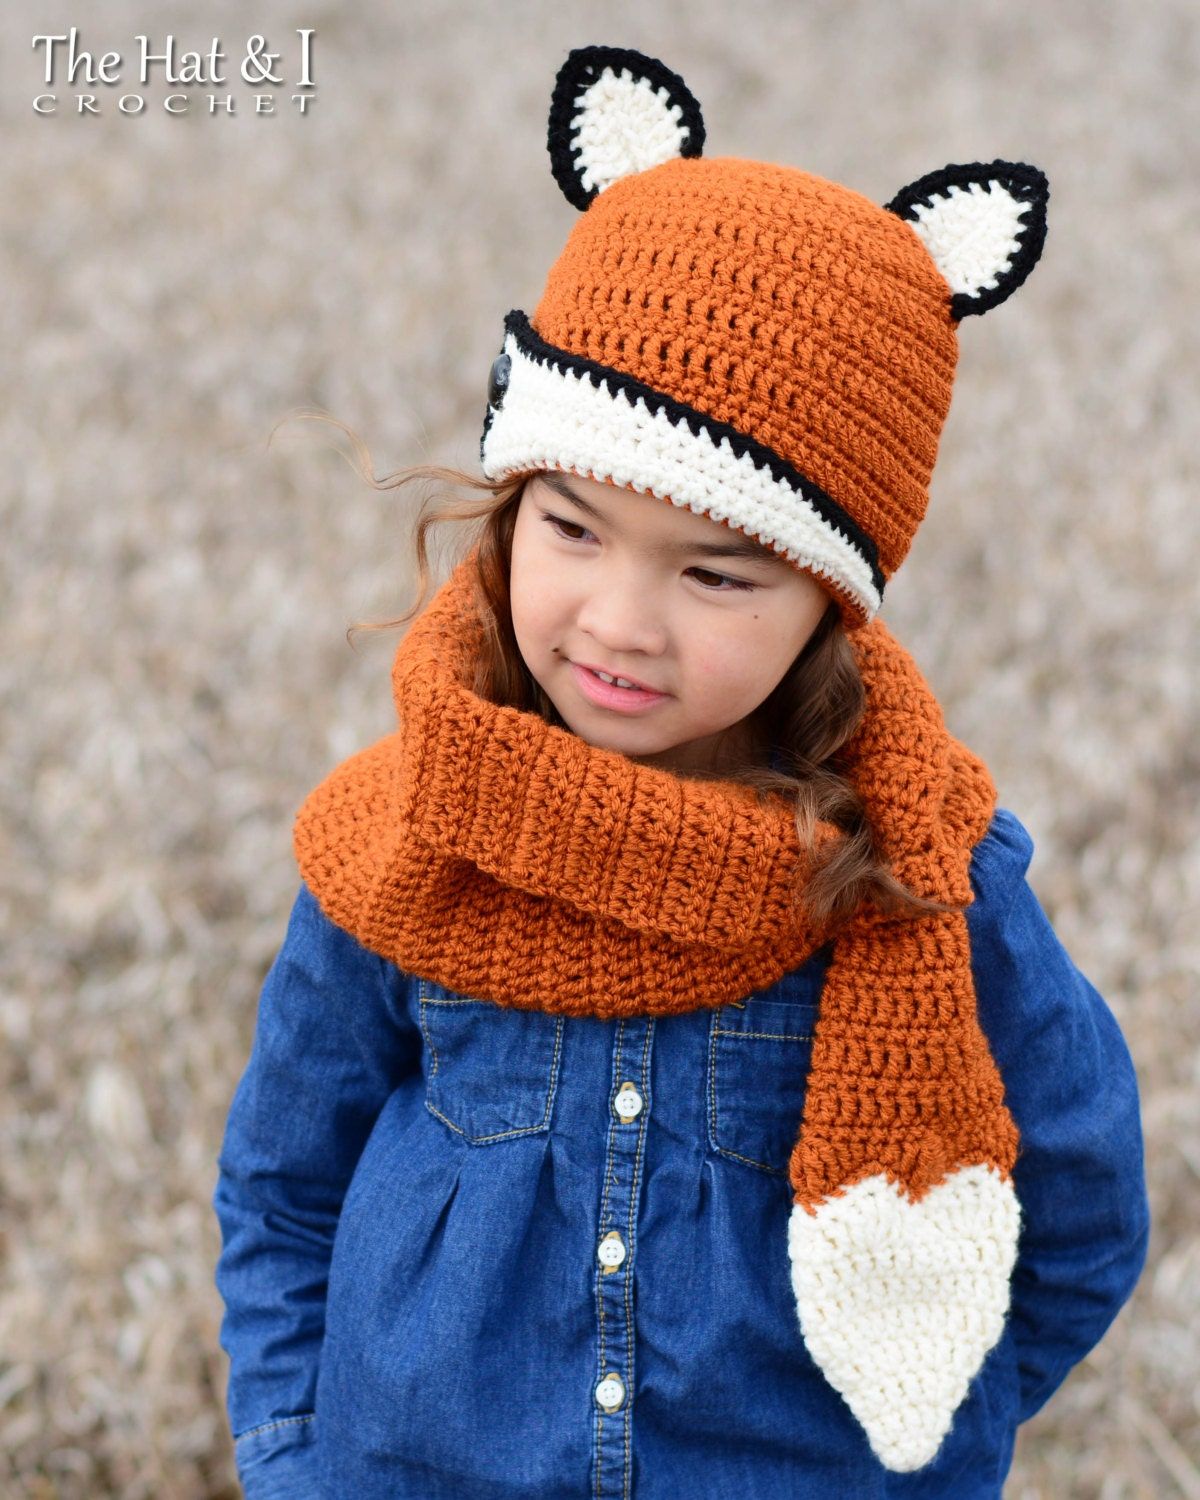 Brunette child outside wearing an orange crochet beanie with white and black fox ears and matching scarf with white fox tail tip.